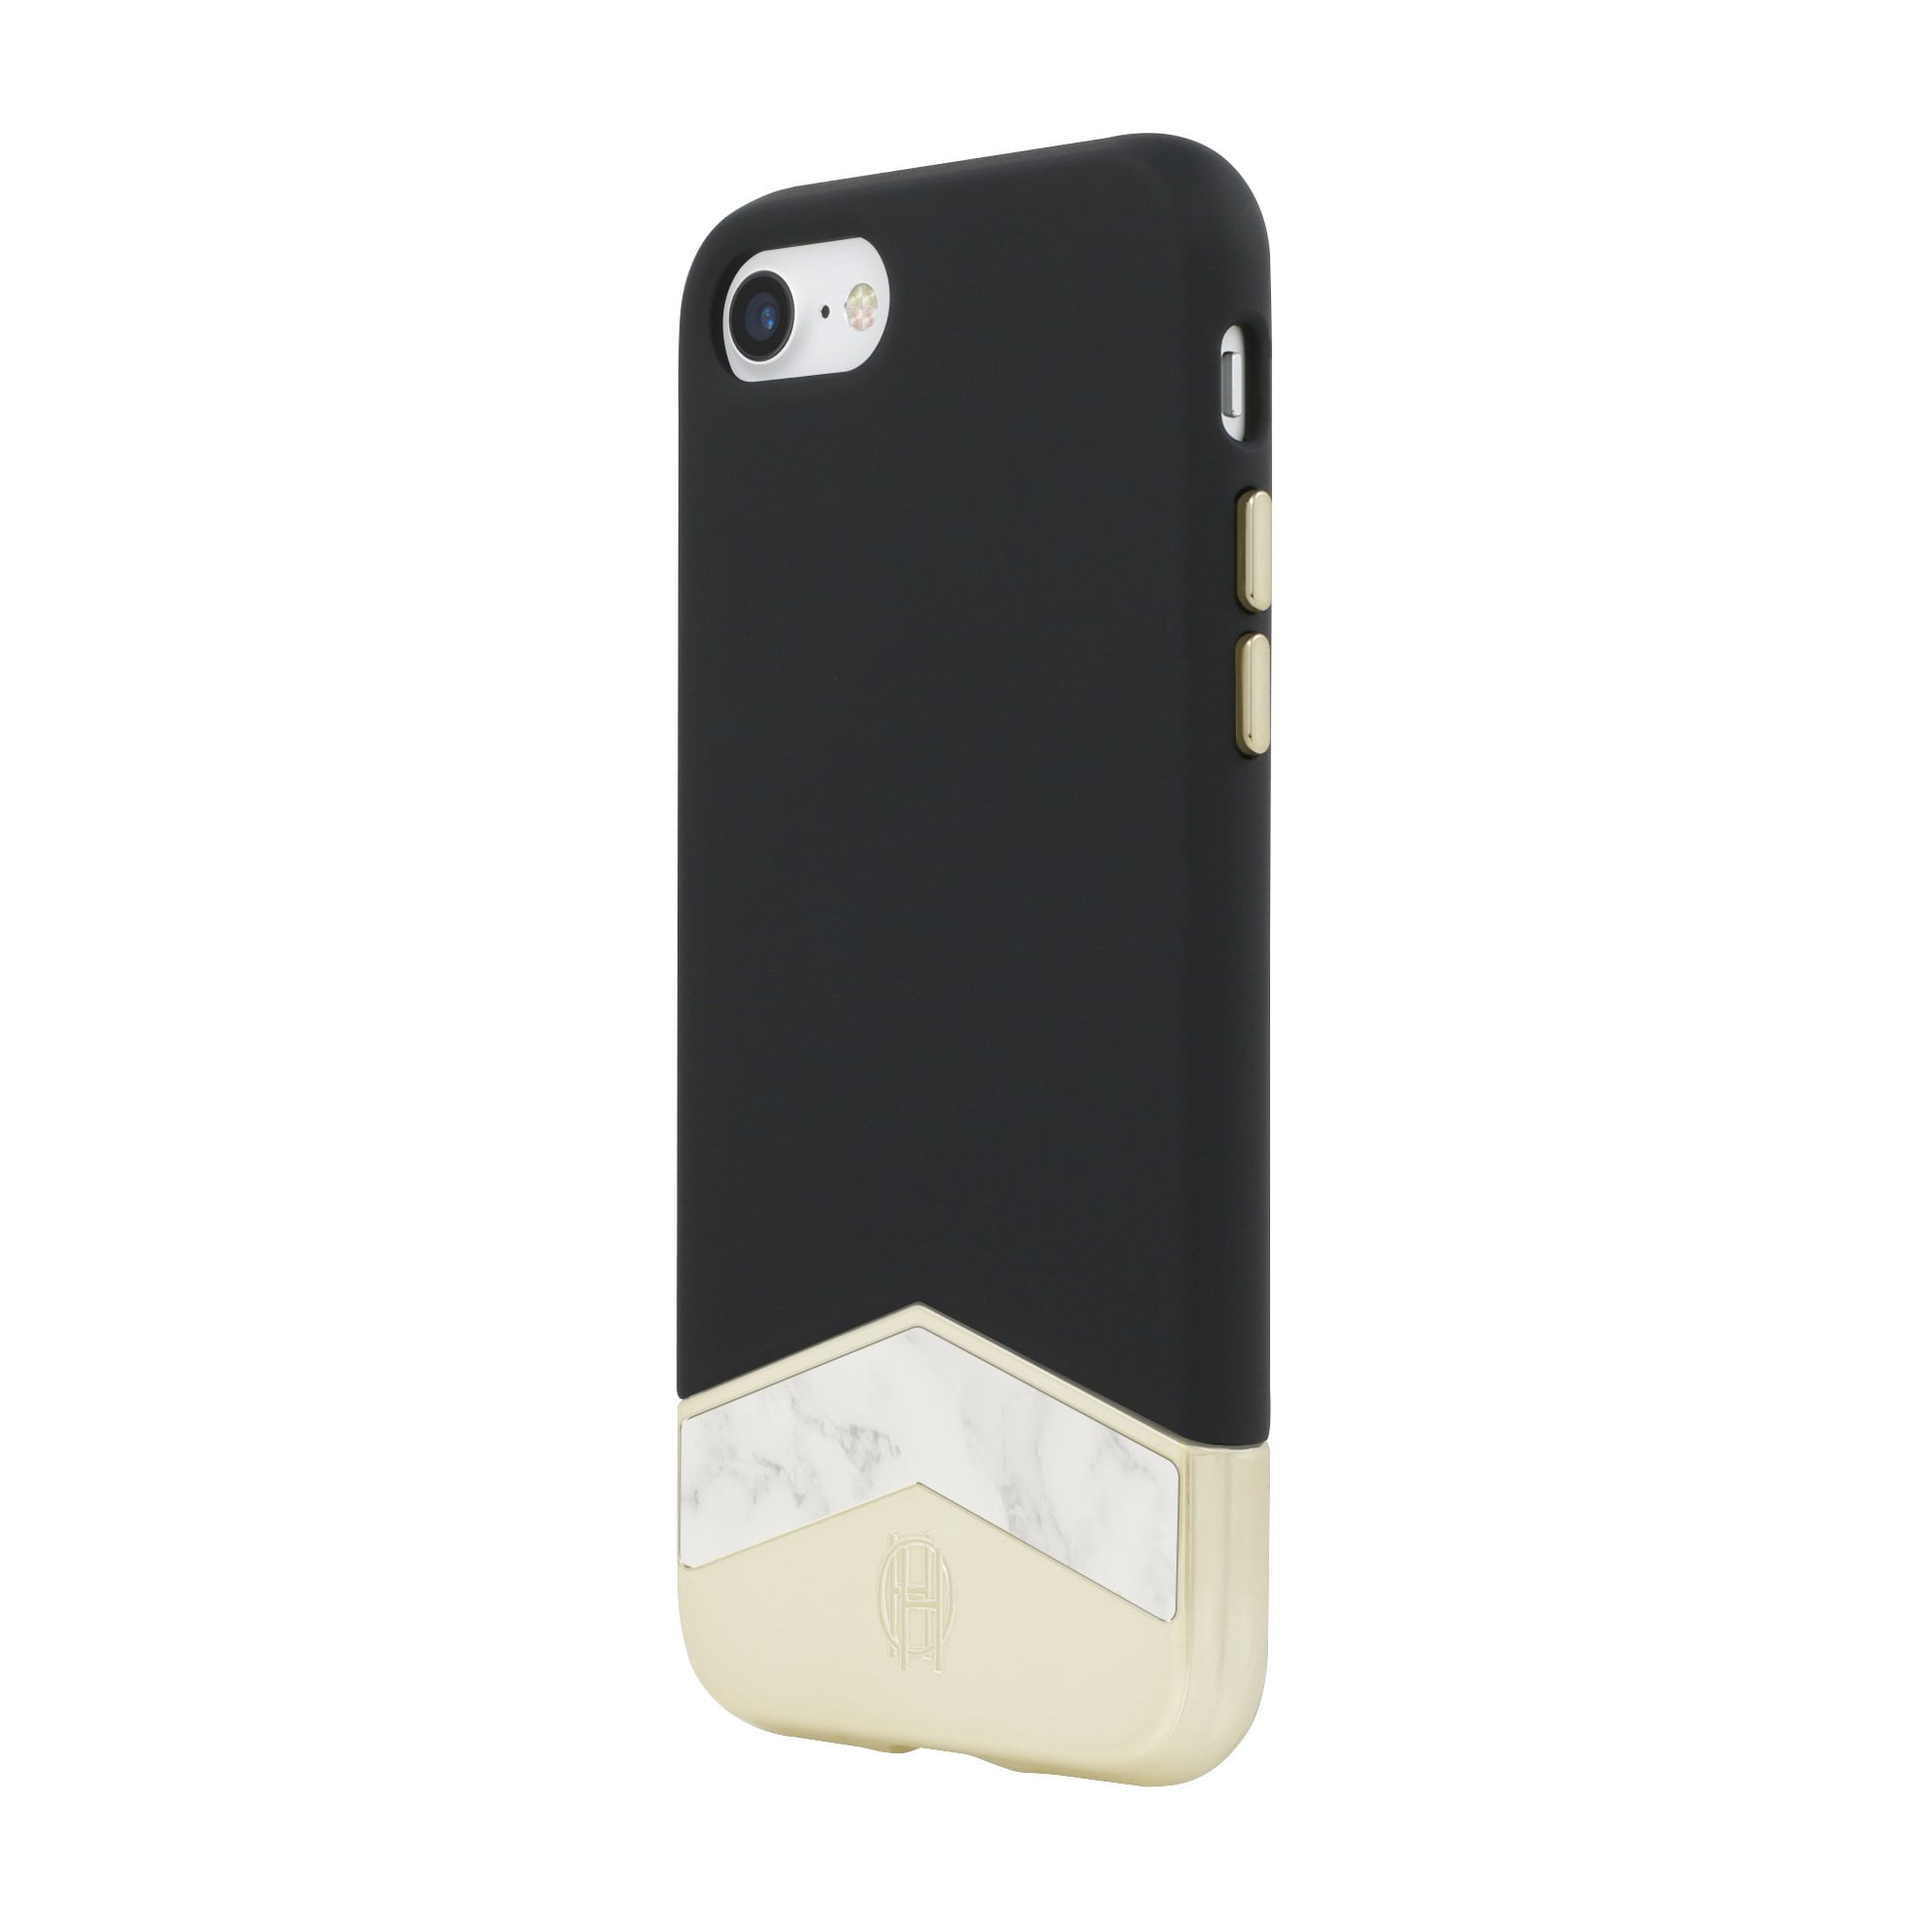 House of Harlow 1960 Slider Case for iPhone 7 - White/Black Marble